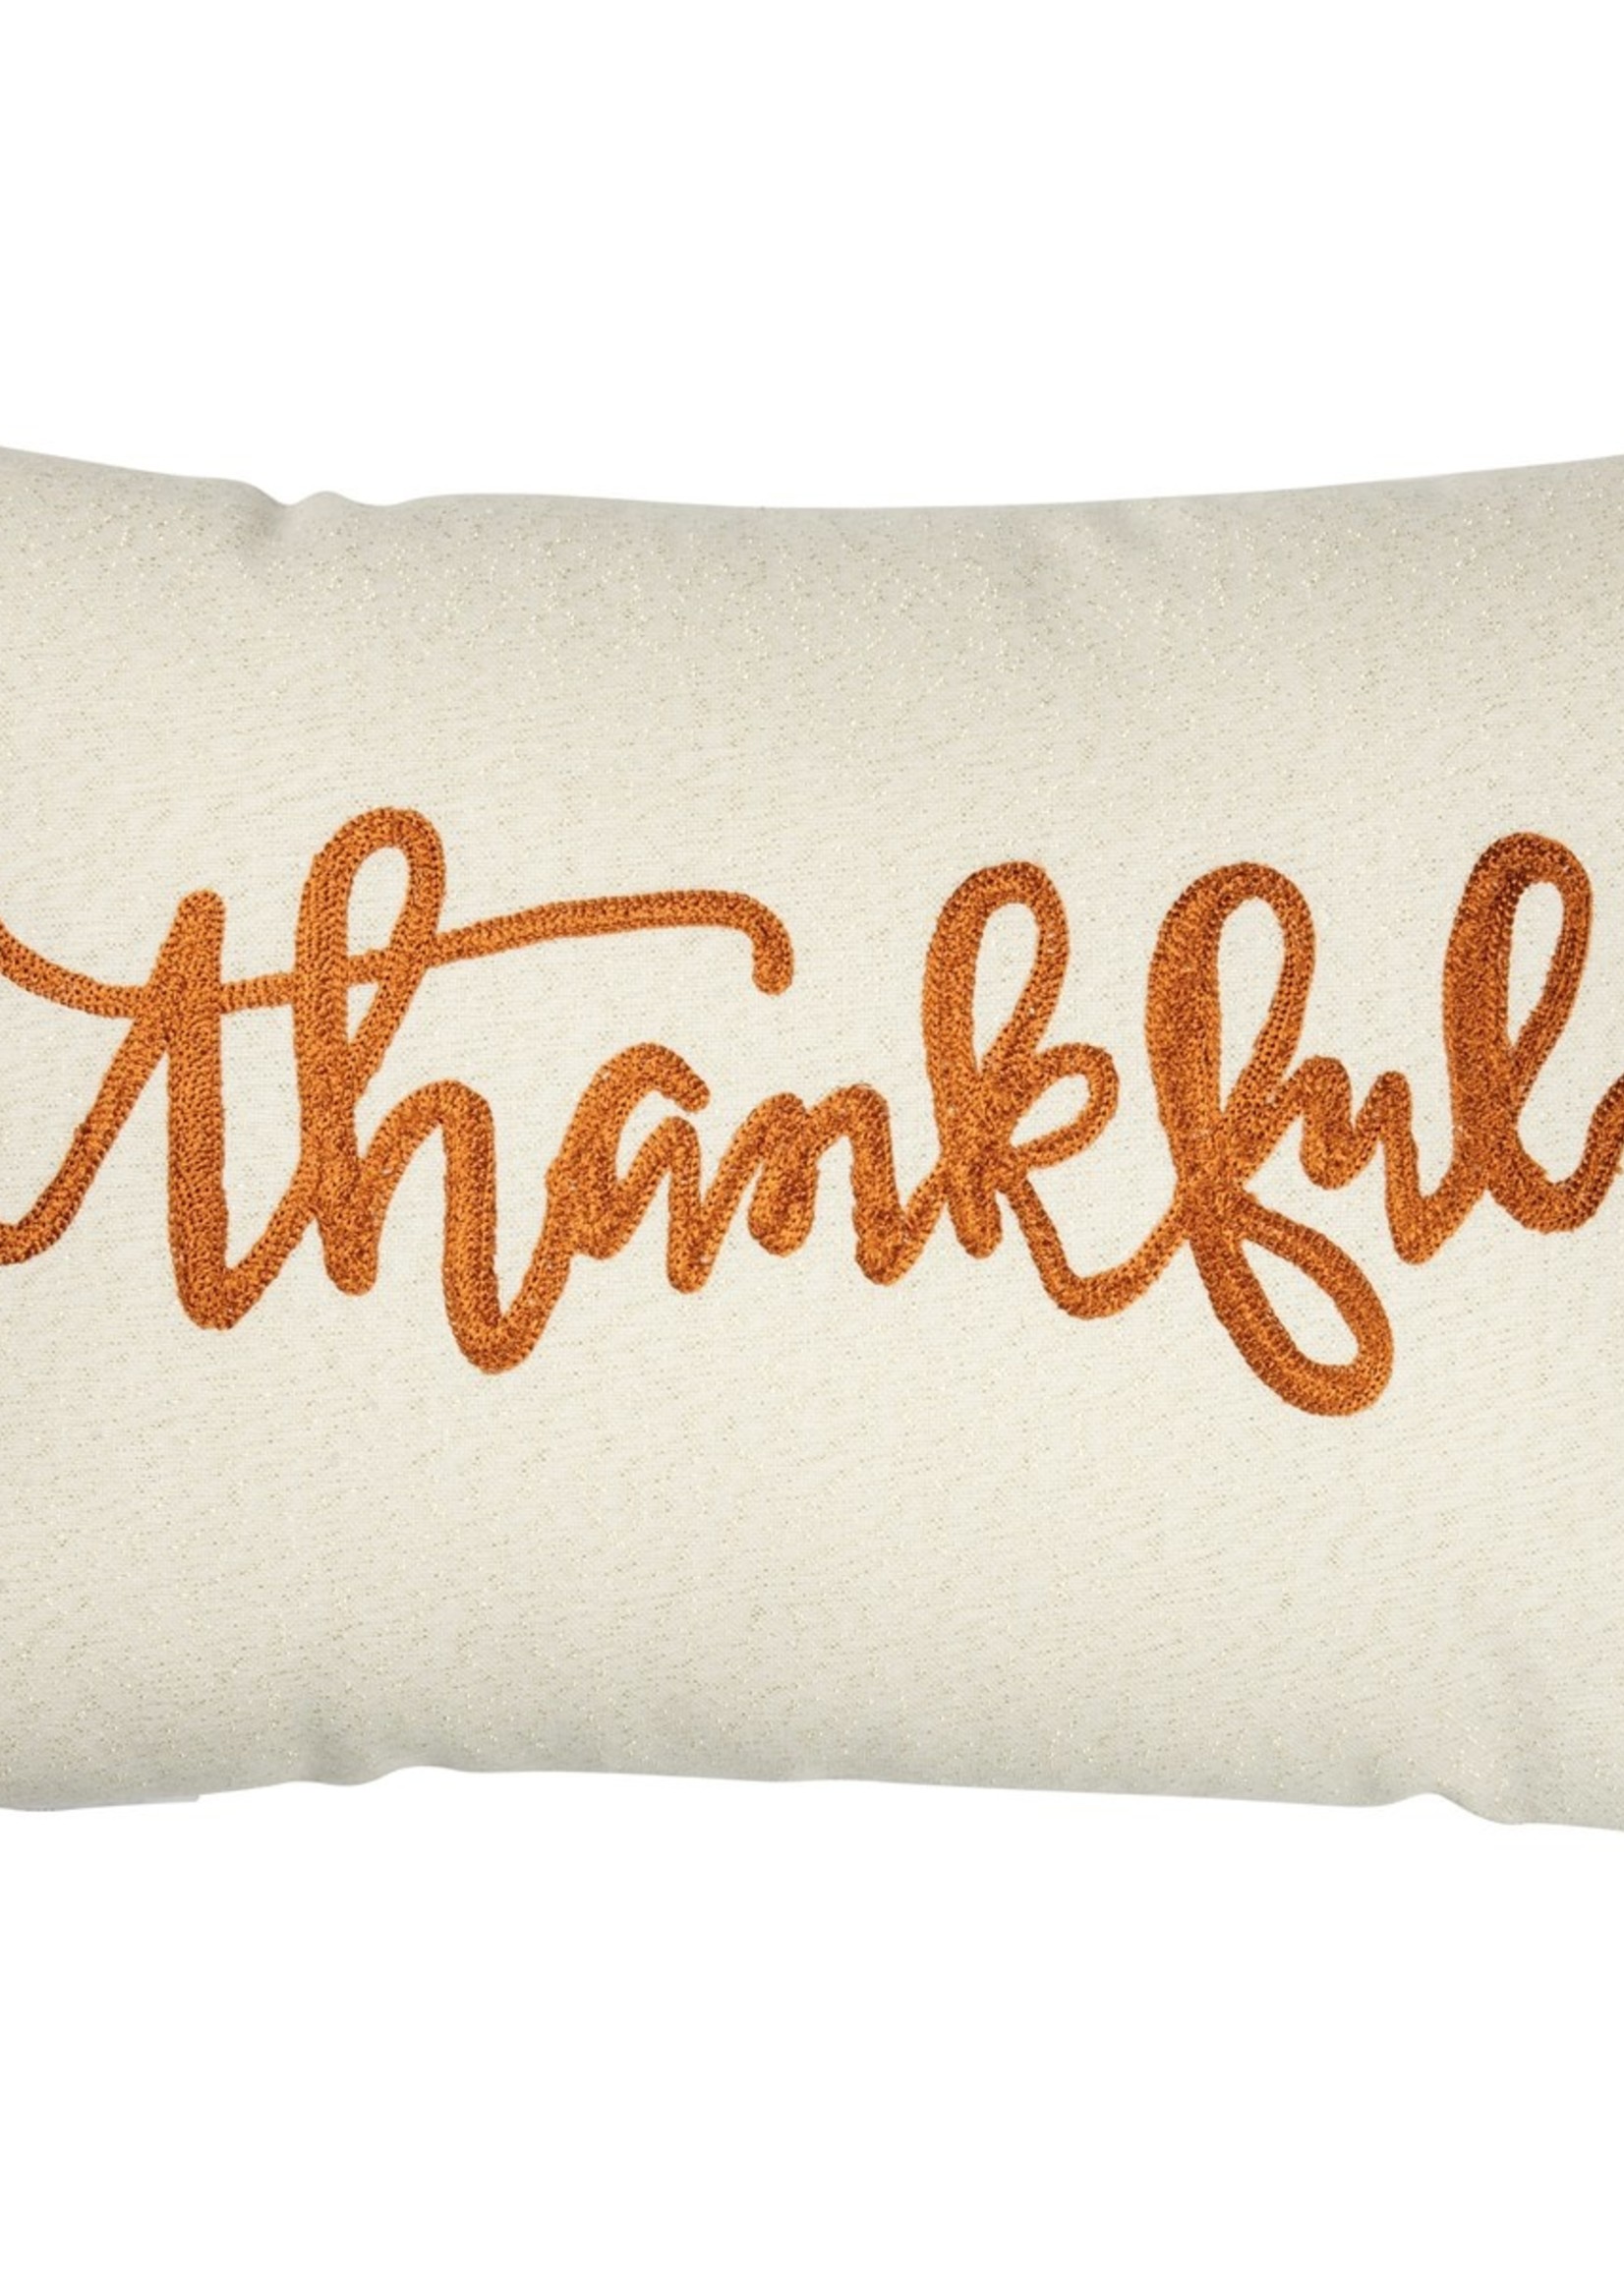 Primitives by Kathy Thankful Pillow